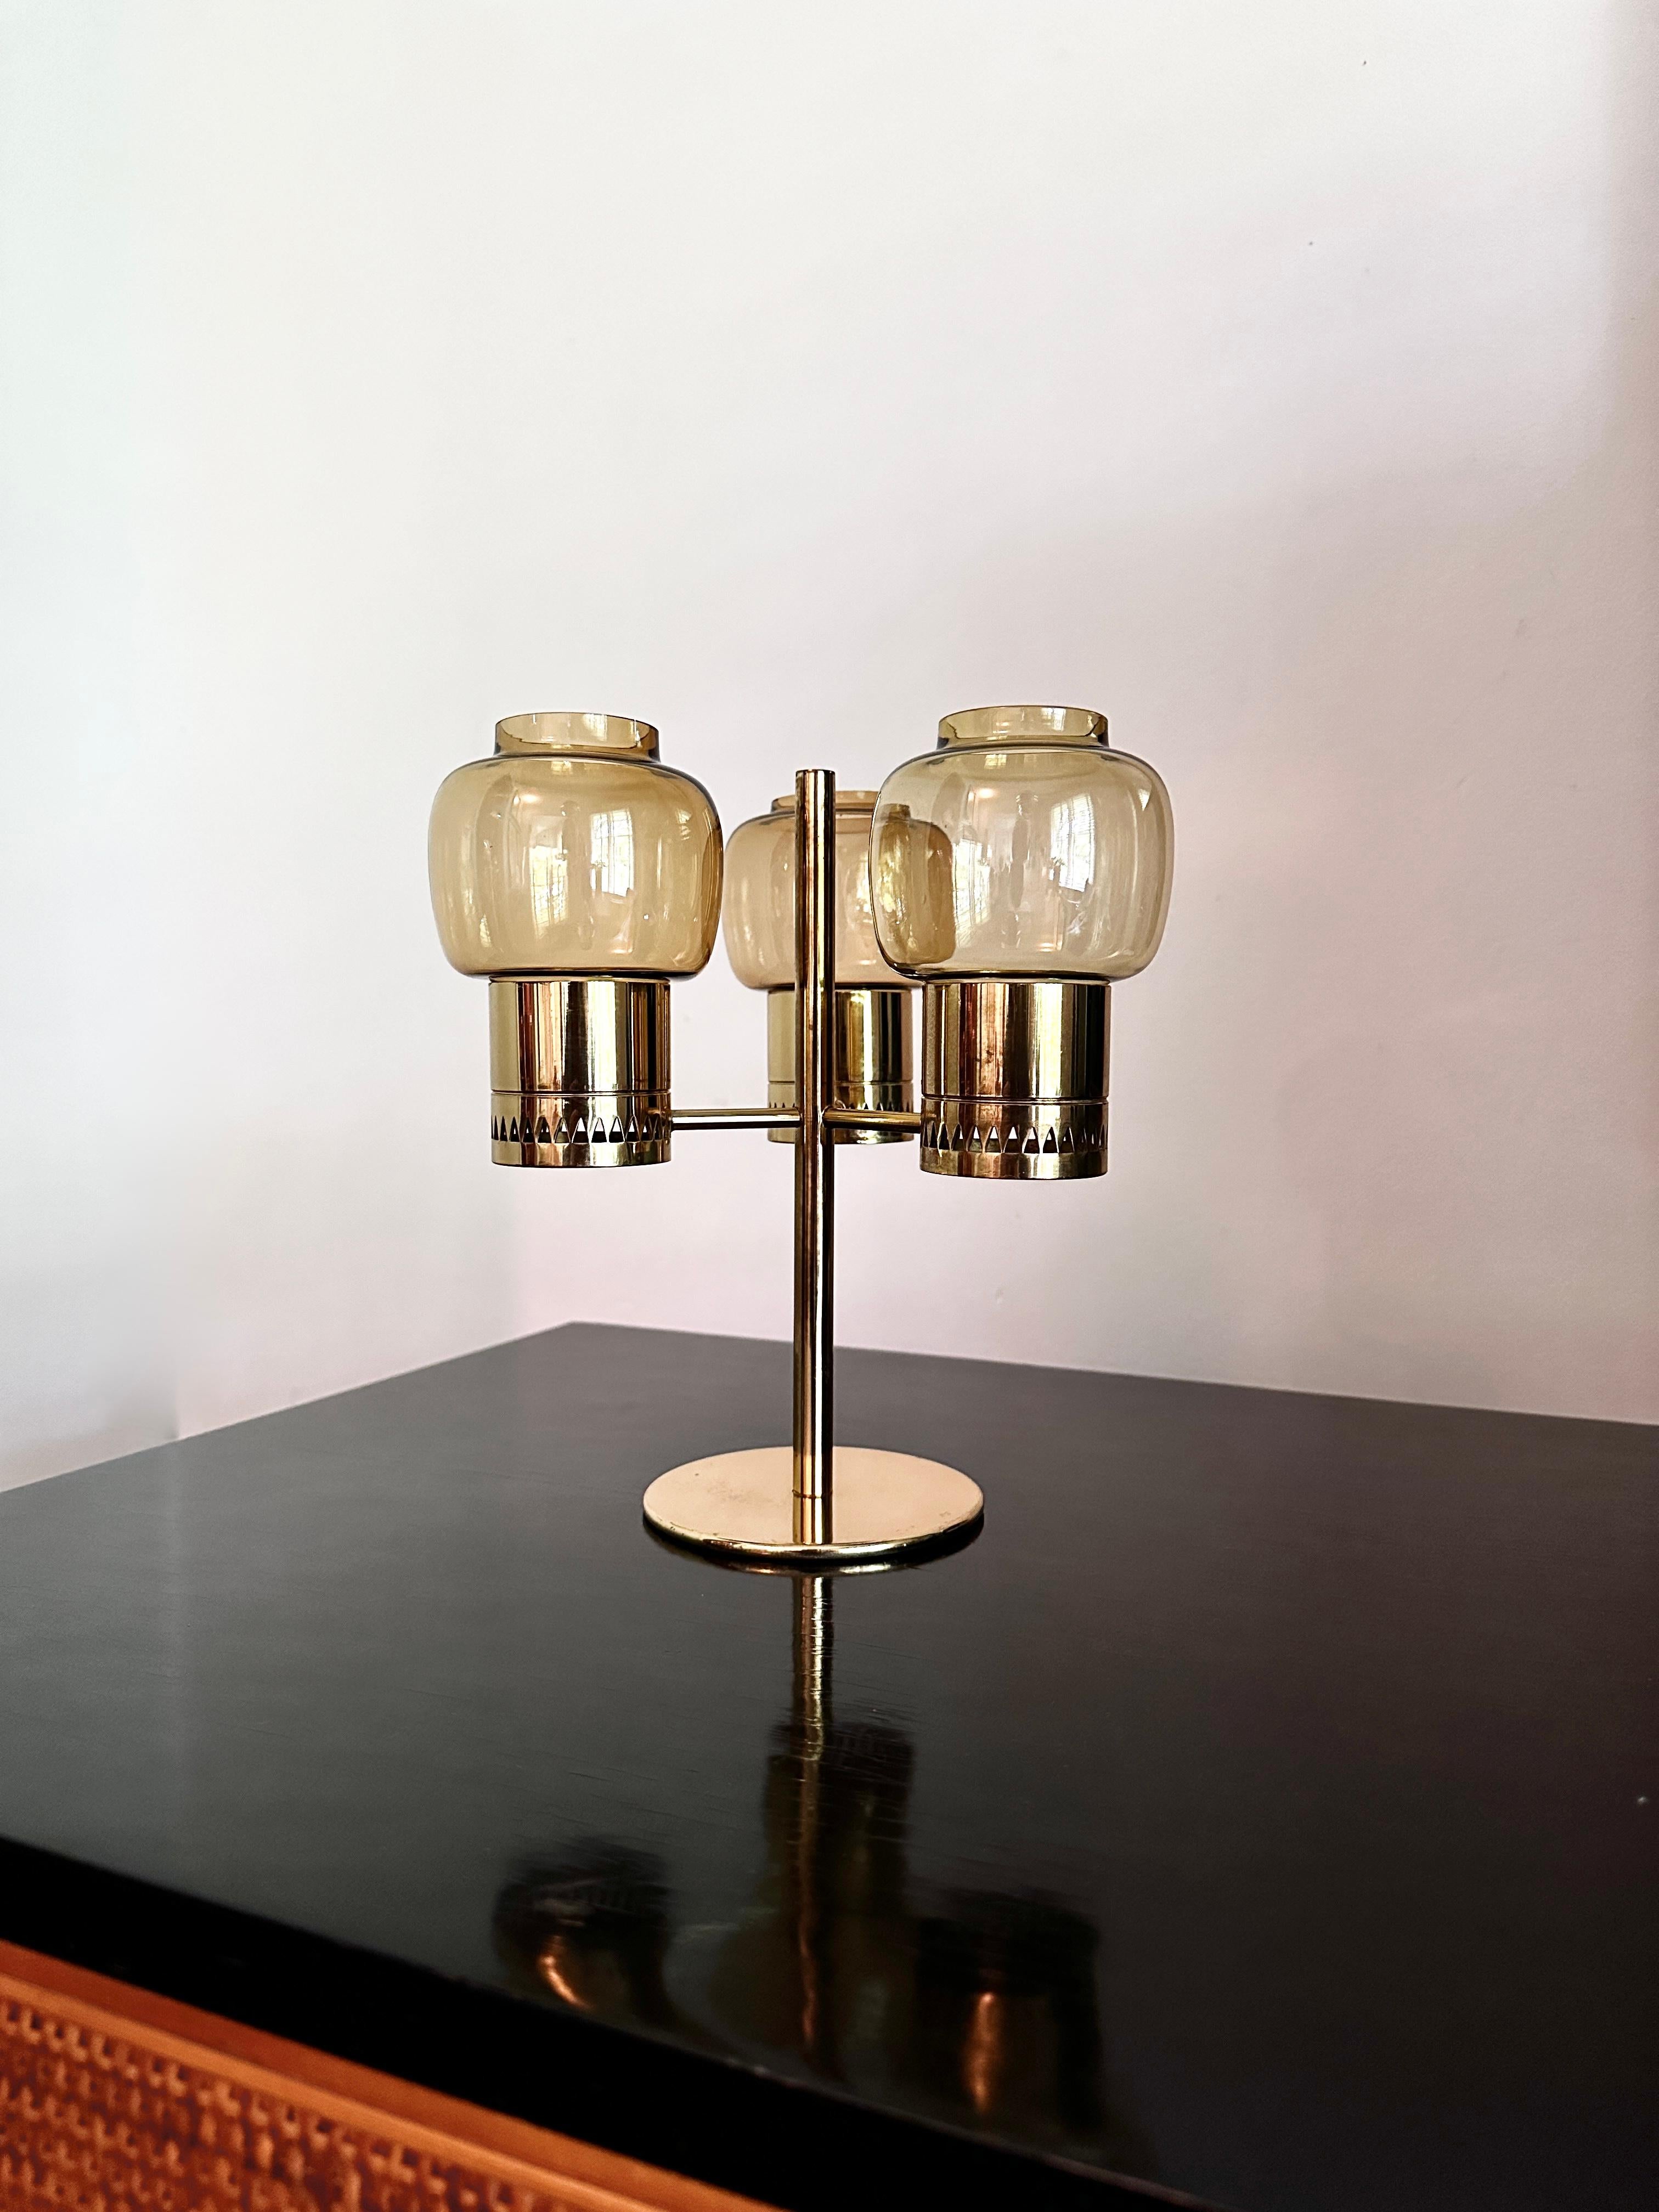 A vintage three light candelabra by Swedish architect / industrial designer Hans - Agne Jakobsson. The candelabra was initially designed in the 1960’s and manufactured by Jakobsson’s own company Hans - Agne Jakobsson AB located in Markaryd, Sweden.